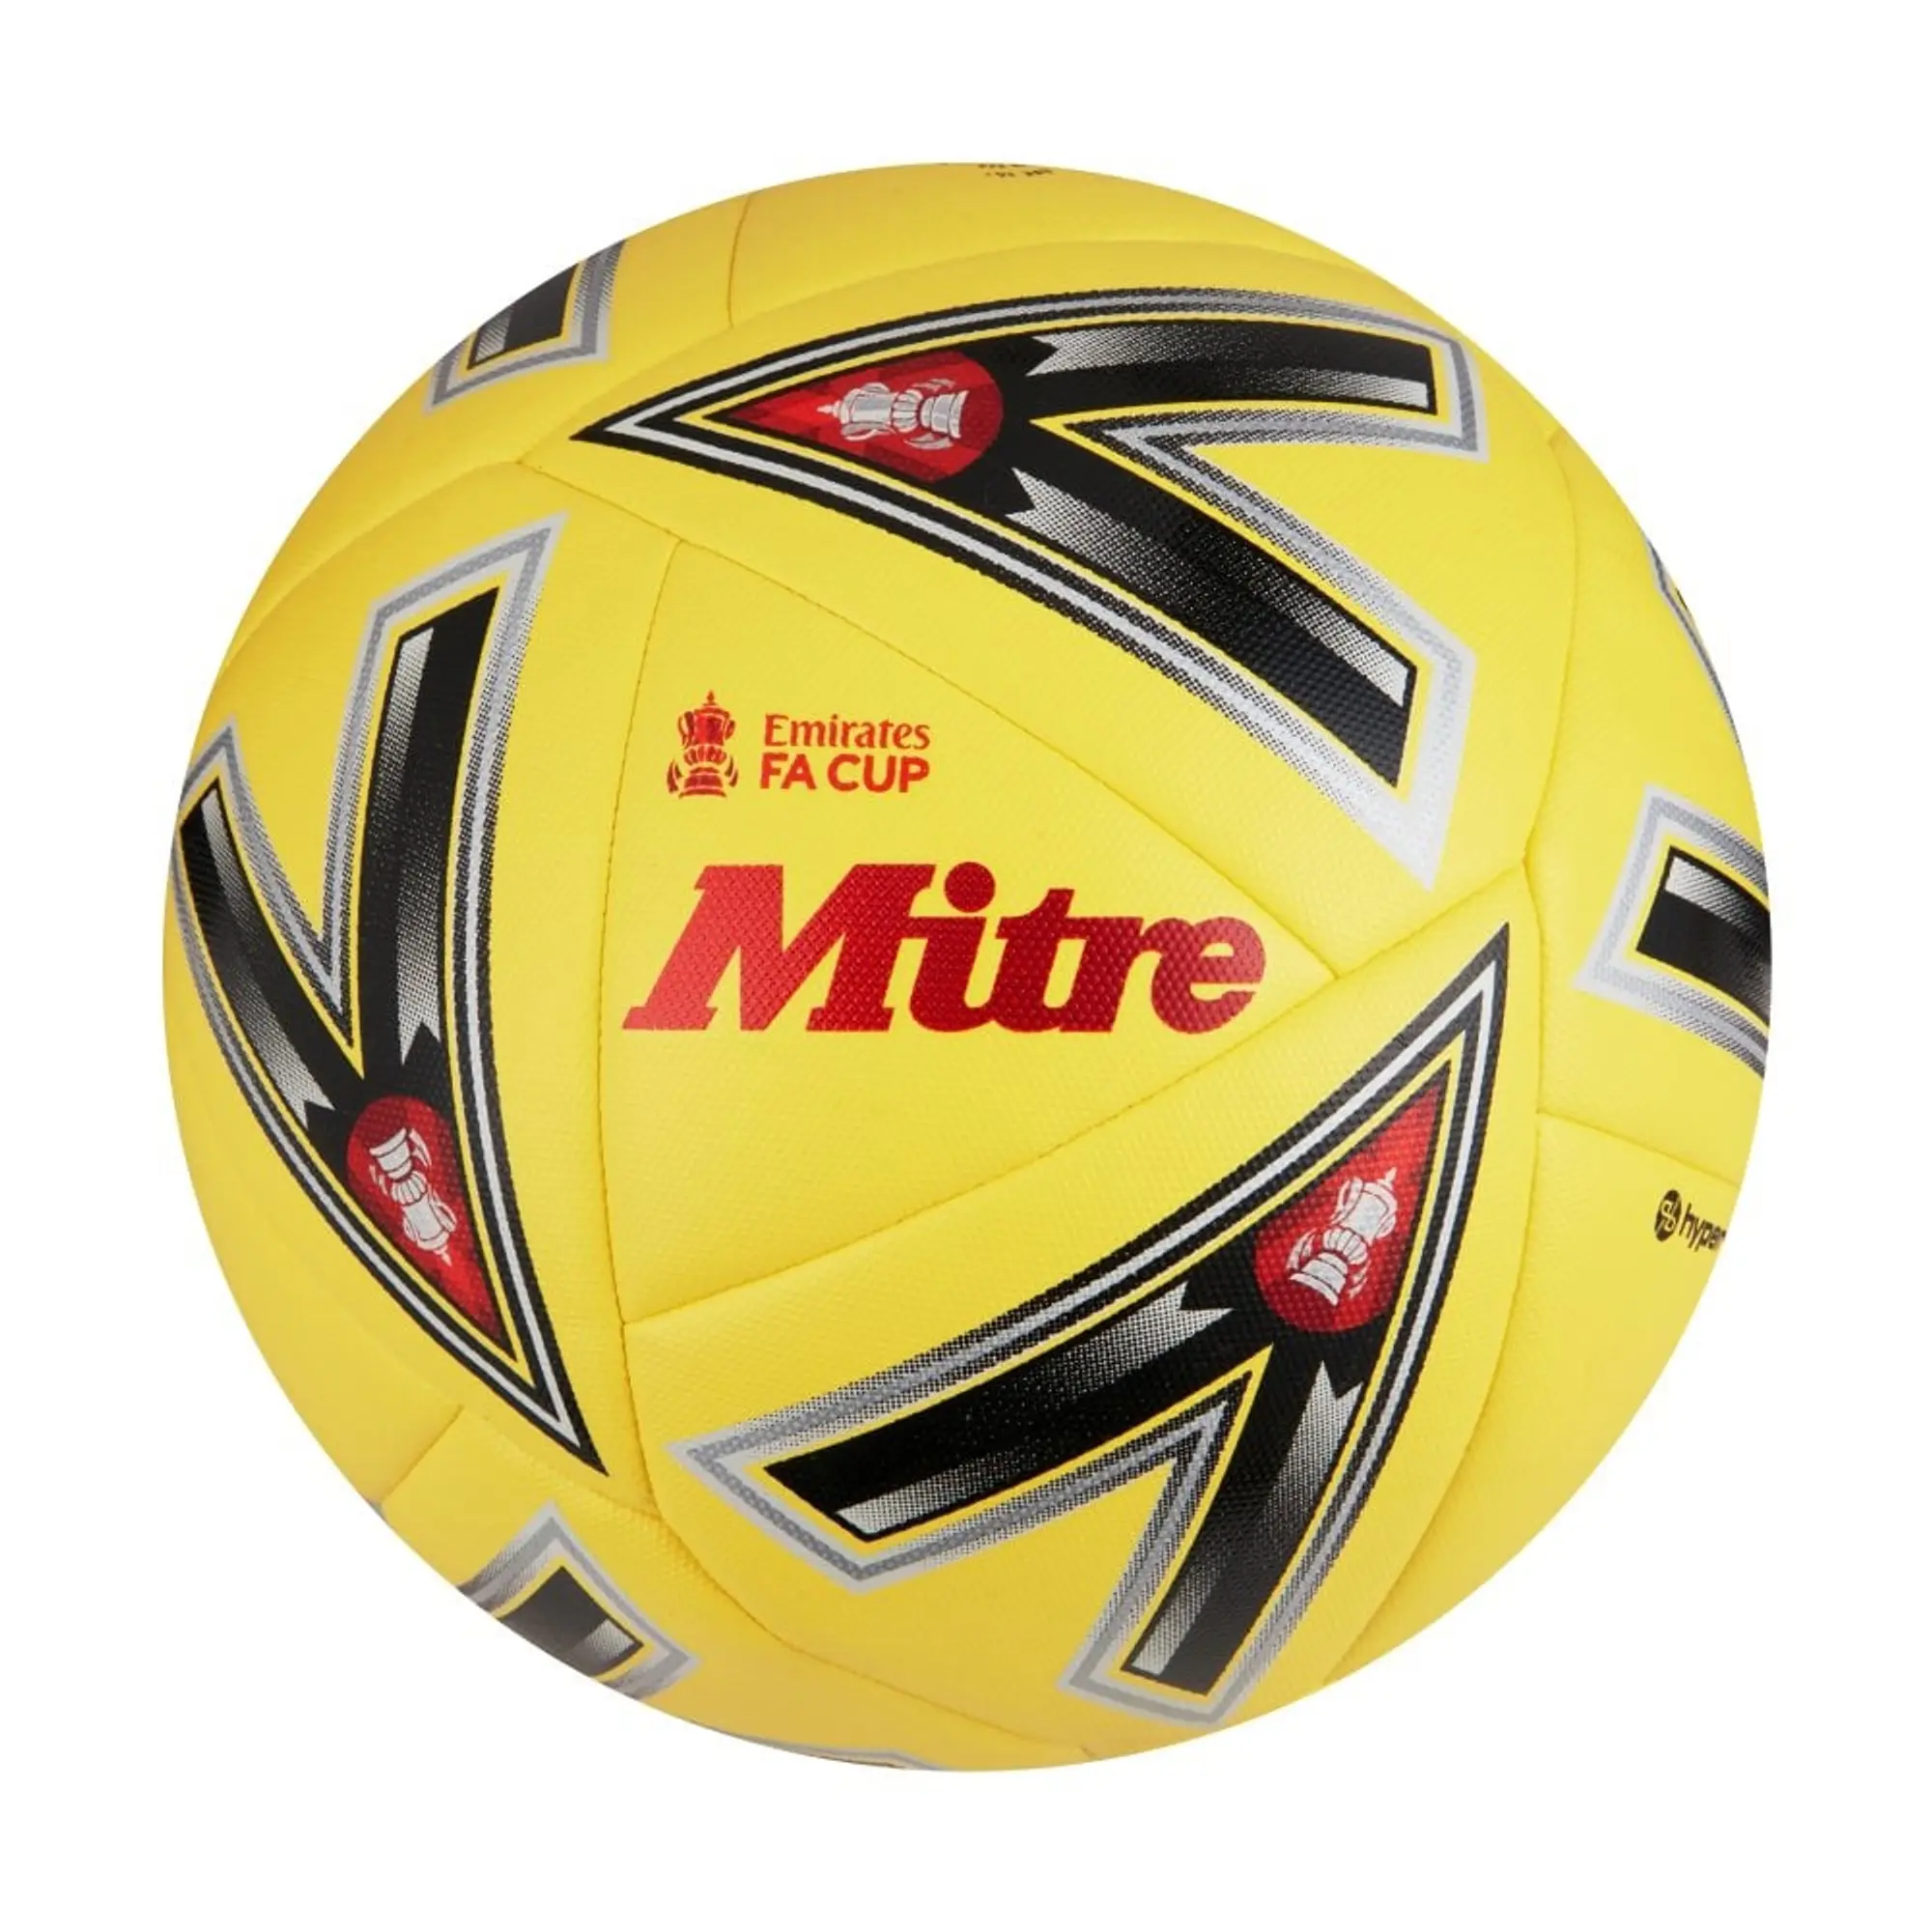 Mitre Emirates FA Cup Match Football - Yellow/Black/Red